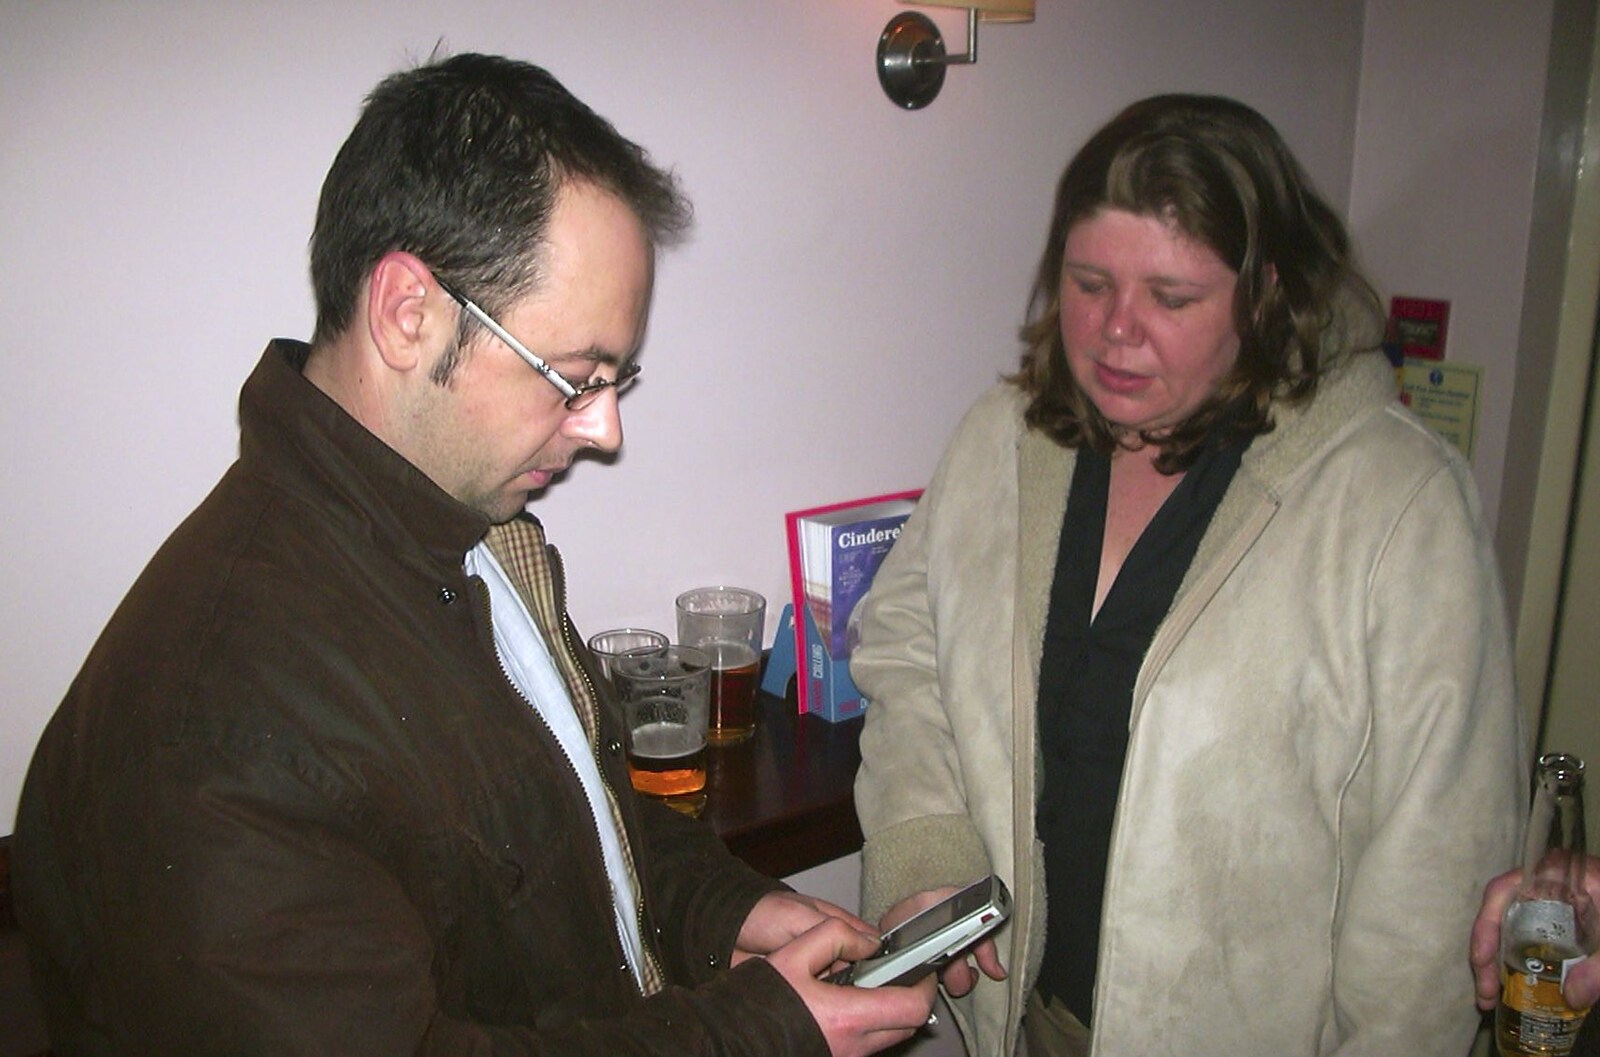 Matt checks his Nokia 7650 from Fireworks and Fairgrounds with Mikey P, Fair Green, Diss, Norfolk - 5th November 2003